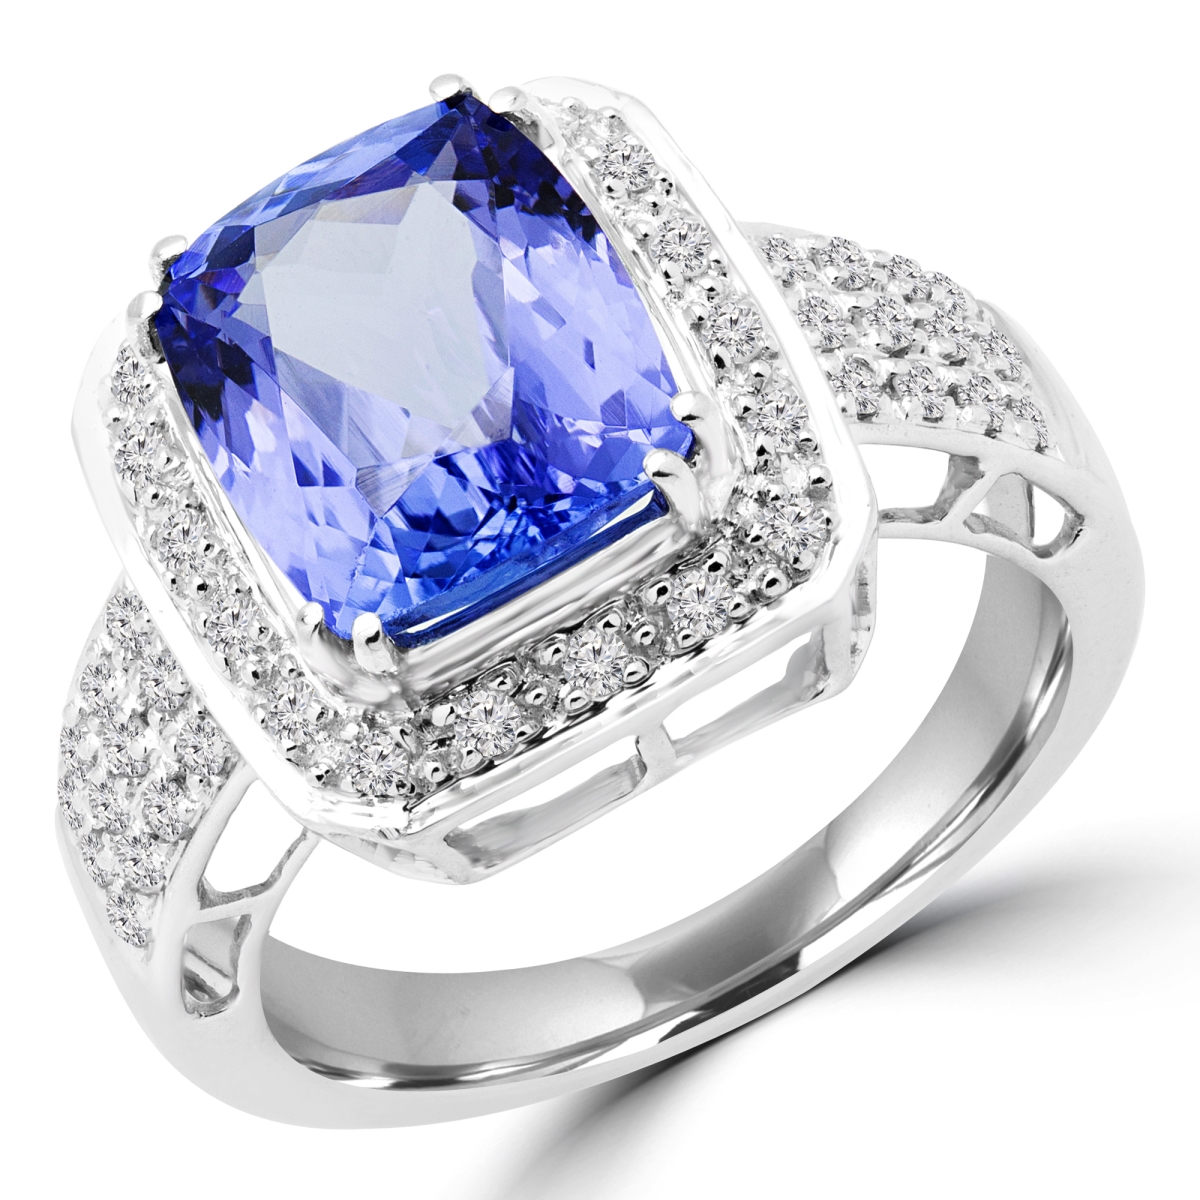 Picture of Majesty Diamonds MD180161-9 3.5 CTW Cushion Purple Tanzanite Halo Cocktail Ring in 14K White Gold - Size 9